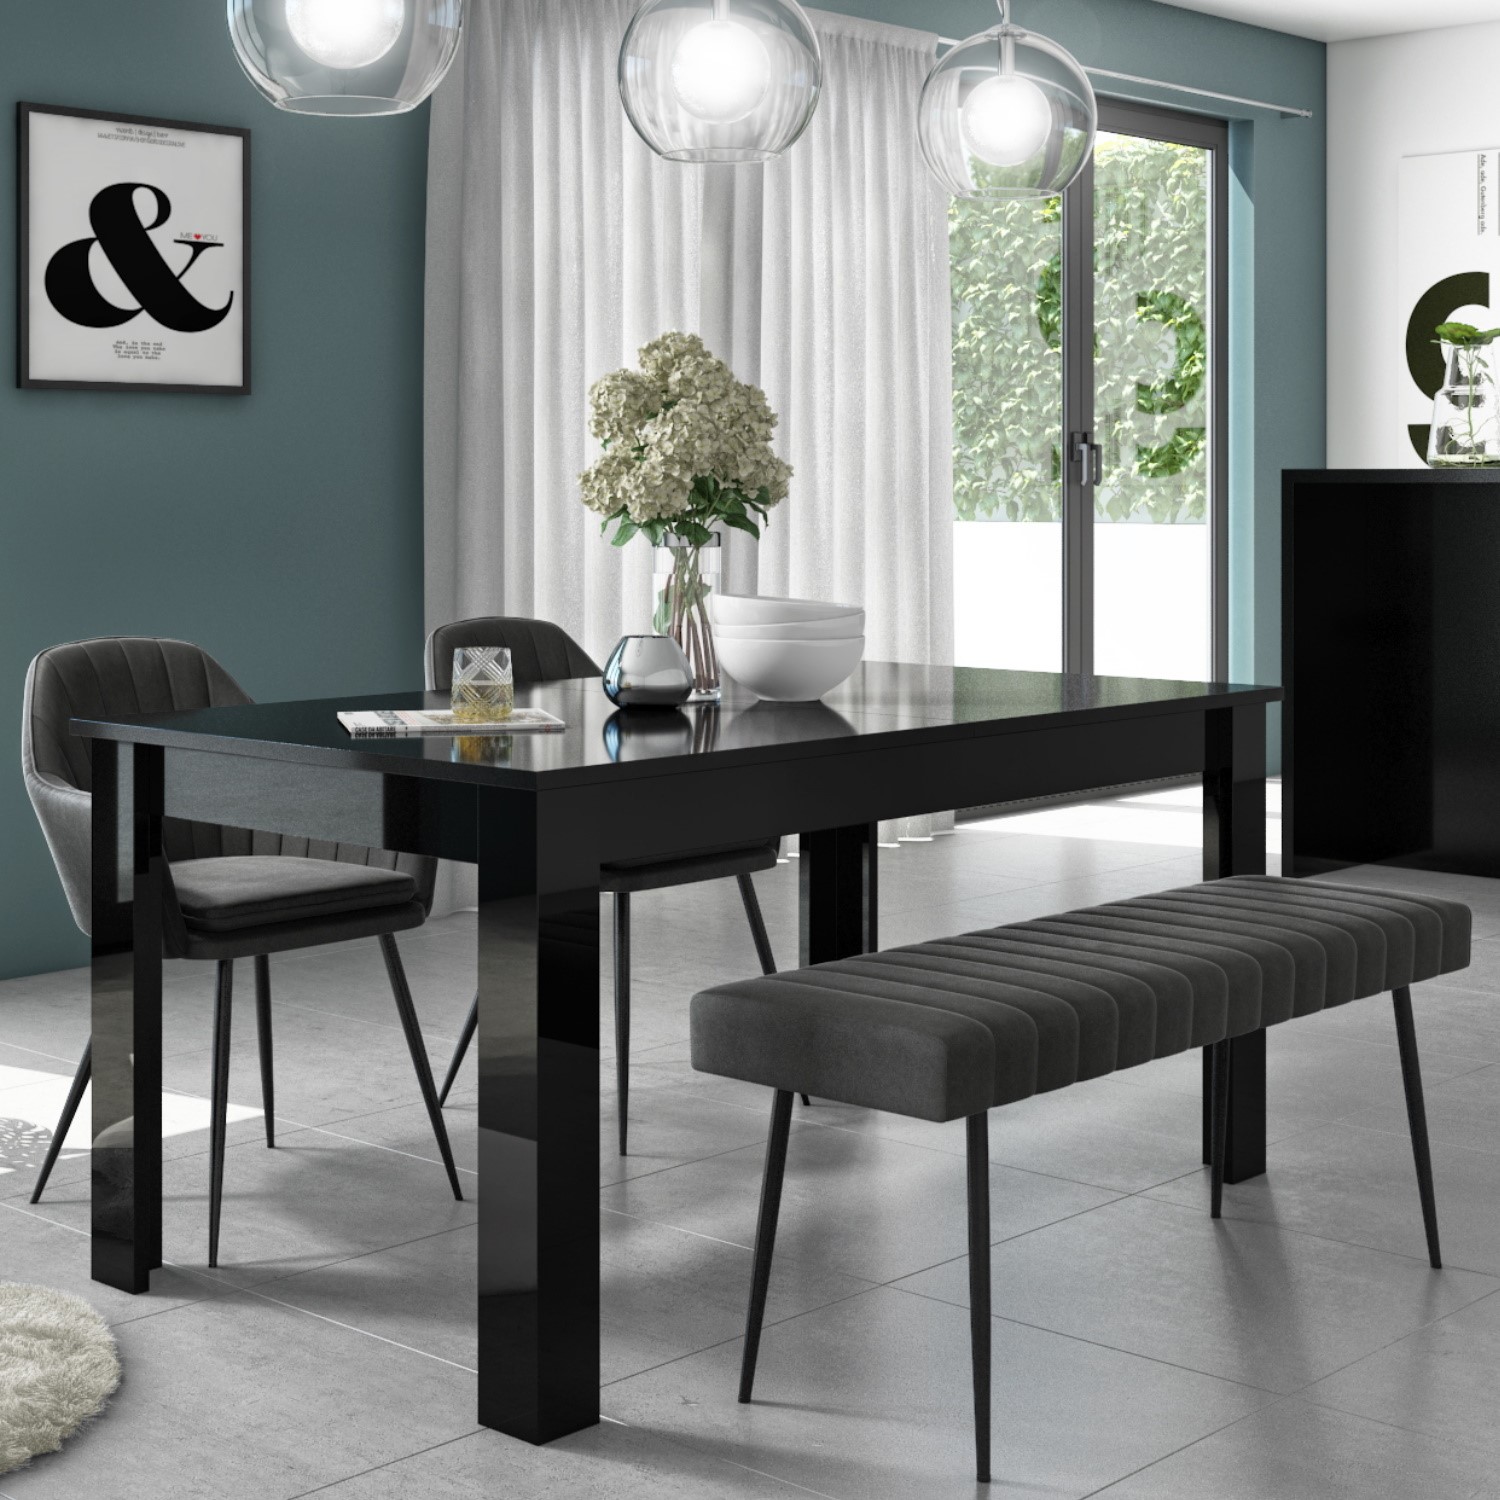 Vivienne Black Gloss Dining Table With, Grey Faux Leather Dining Room Chairs